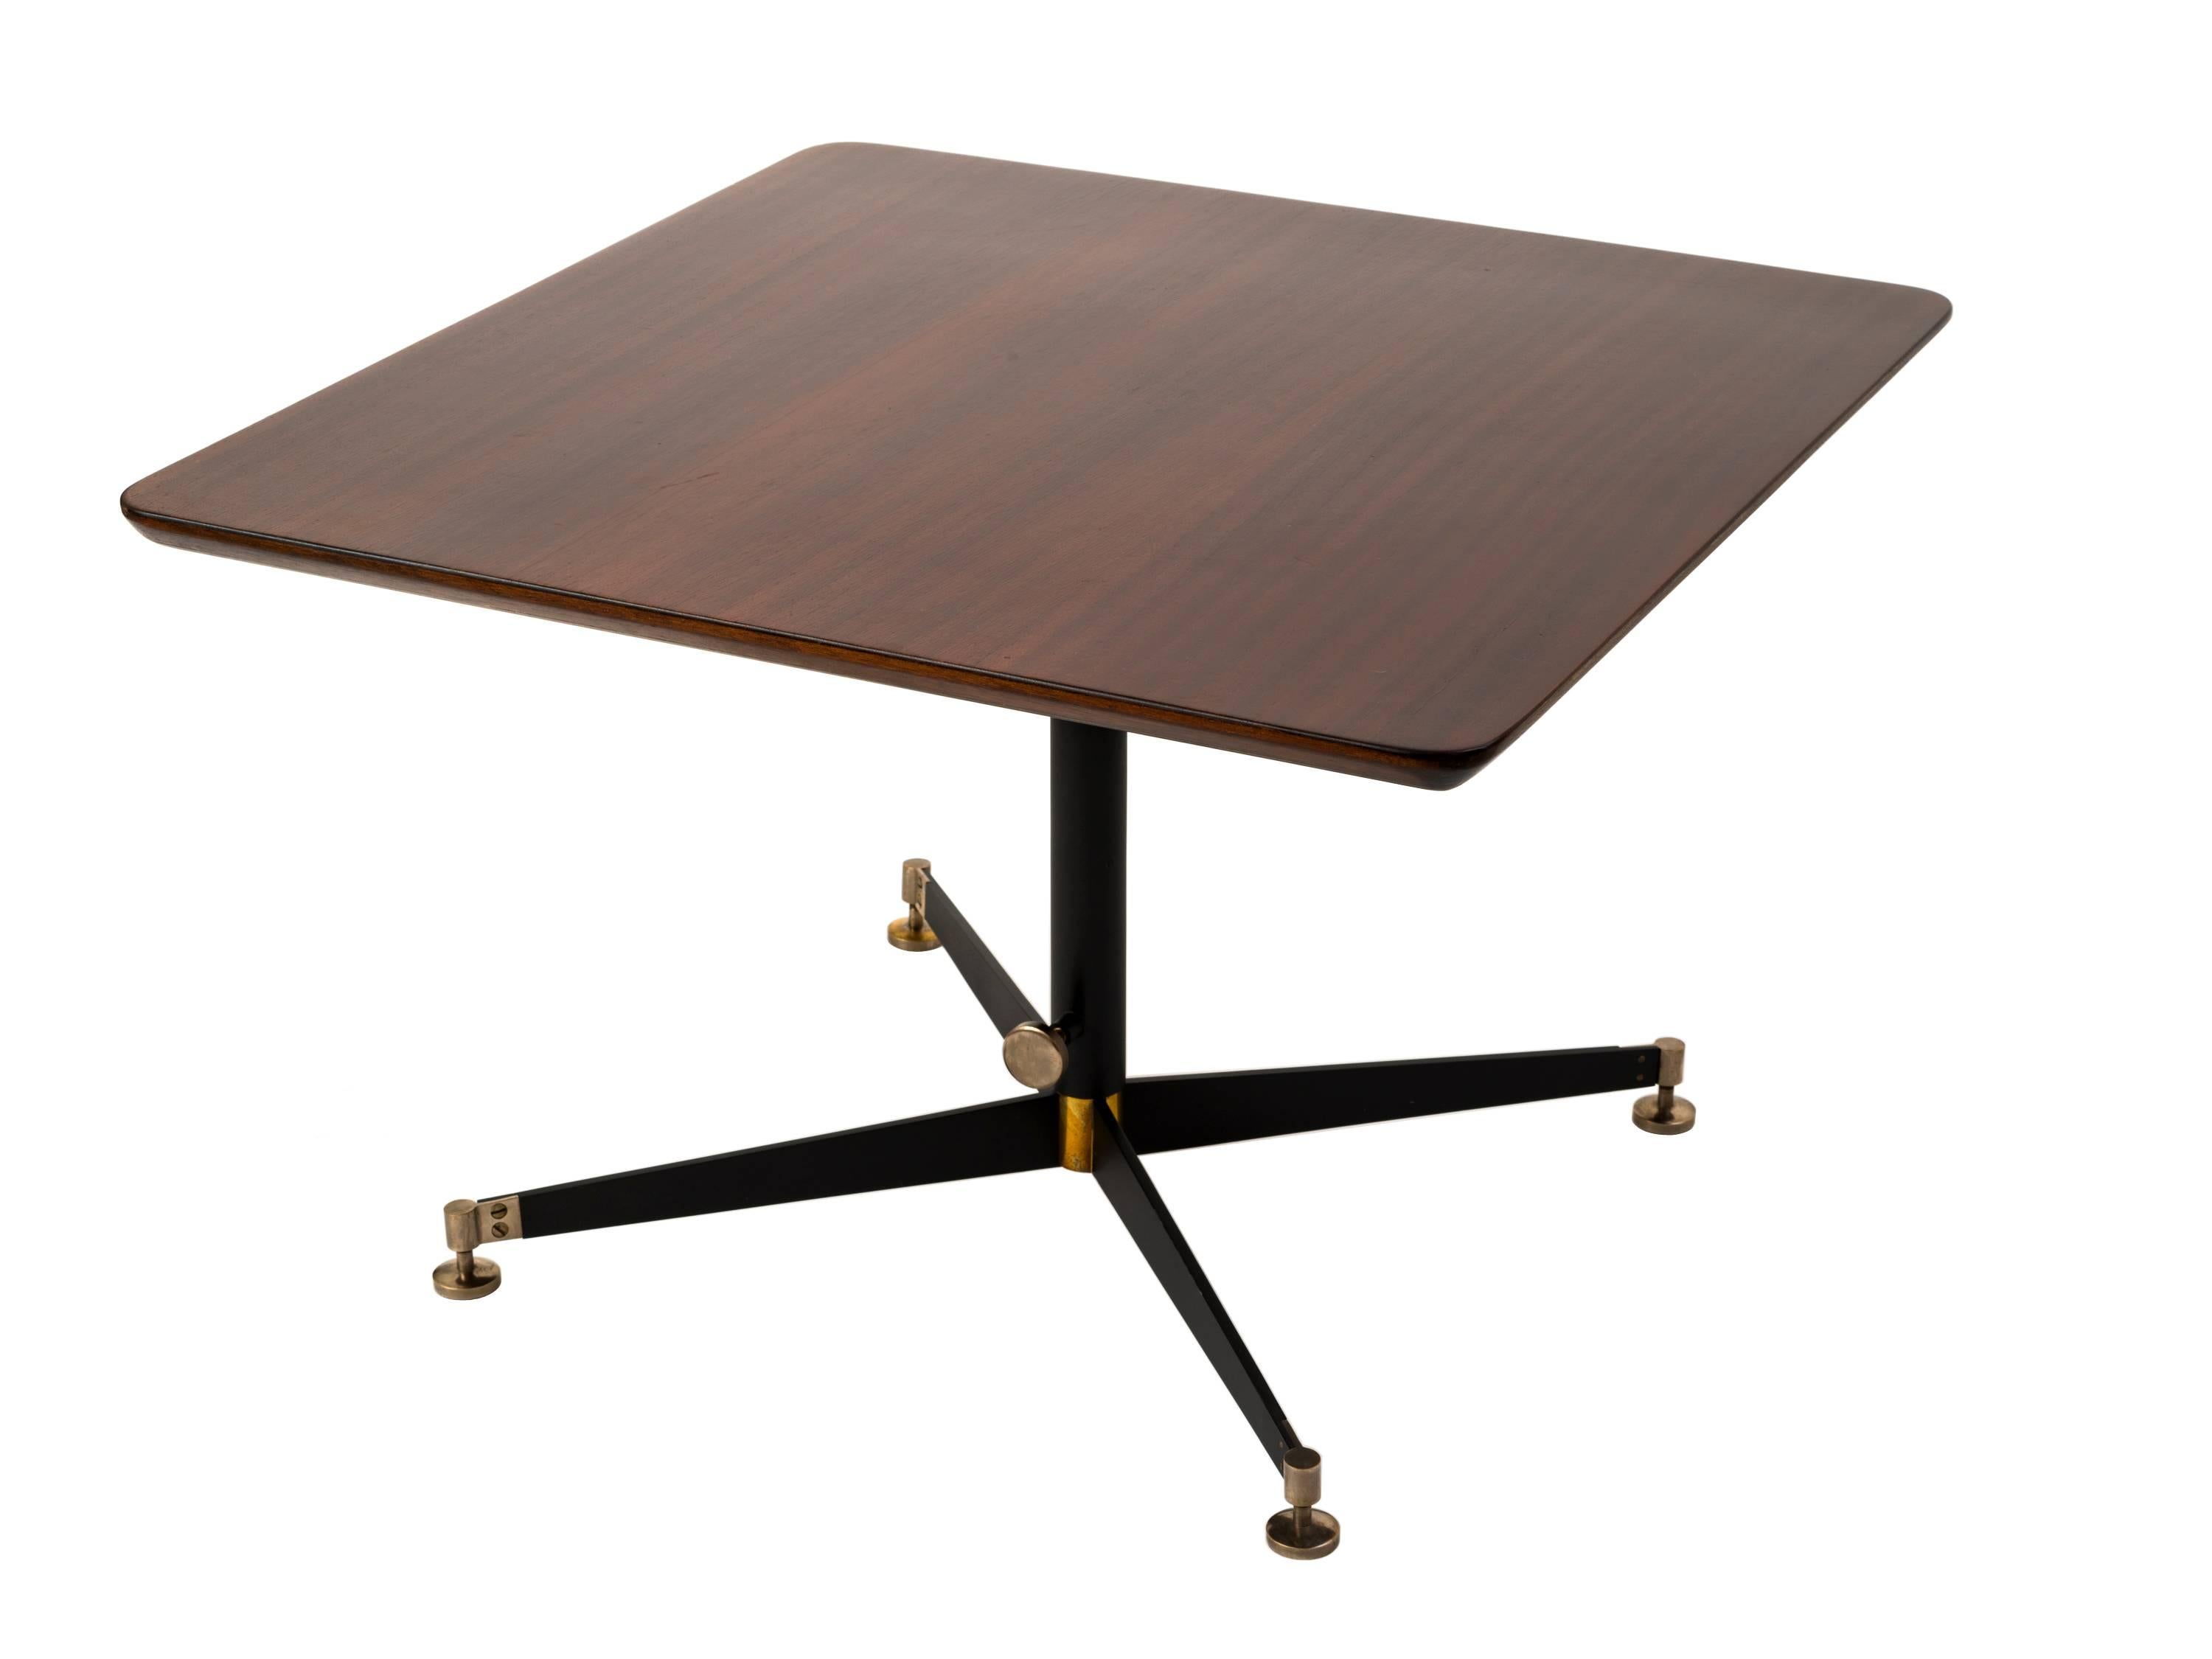 Lacquered Ignazio Gardella T5 Adjustable Height Cocktail or Game Table in Cherry